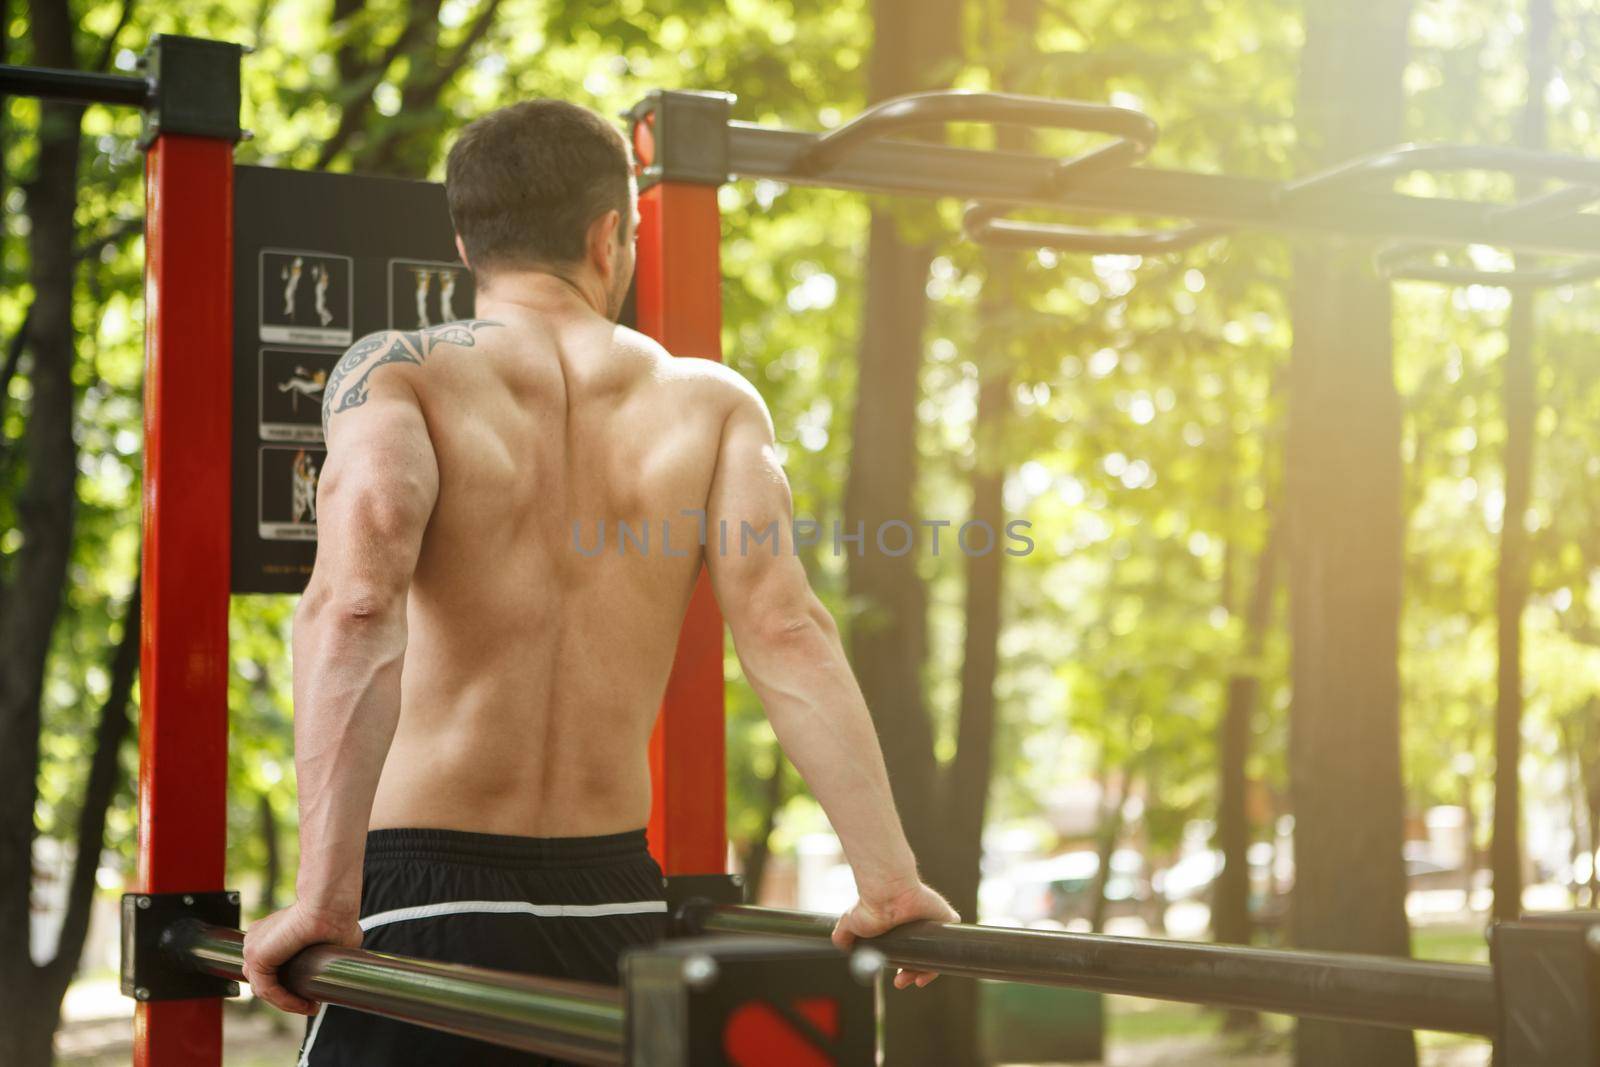 Unrecognizable sportsman working out on calisthenics equipment in the forest